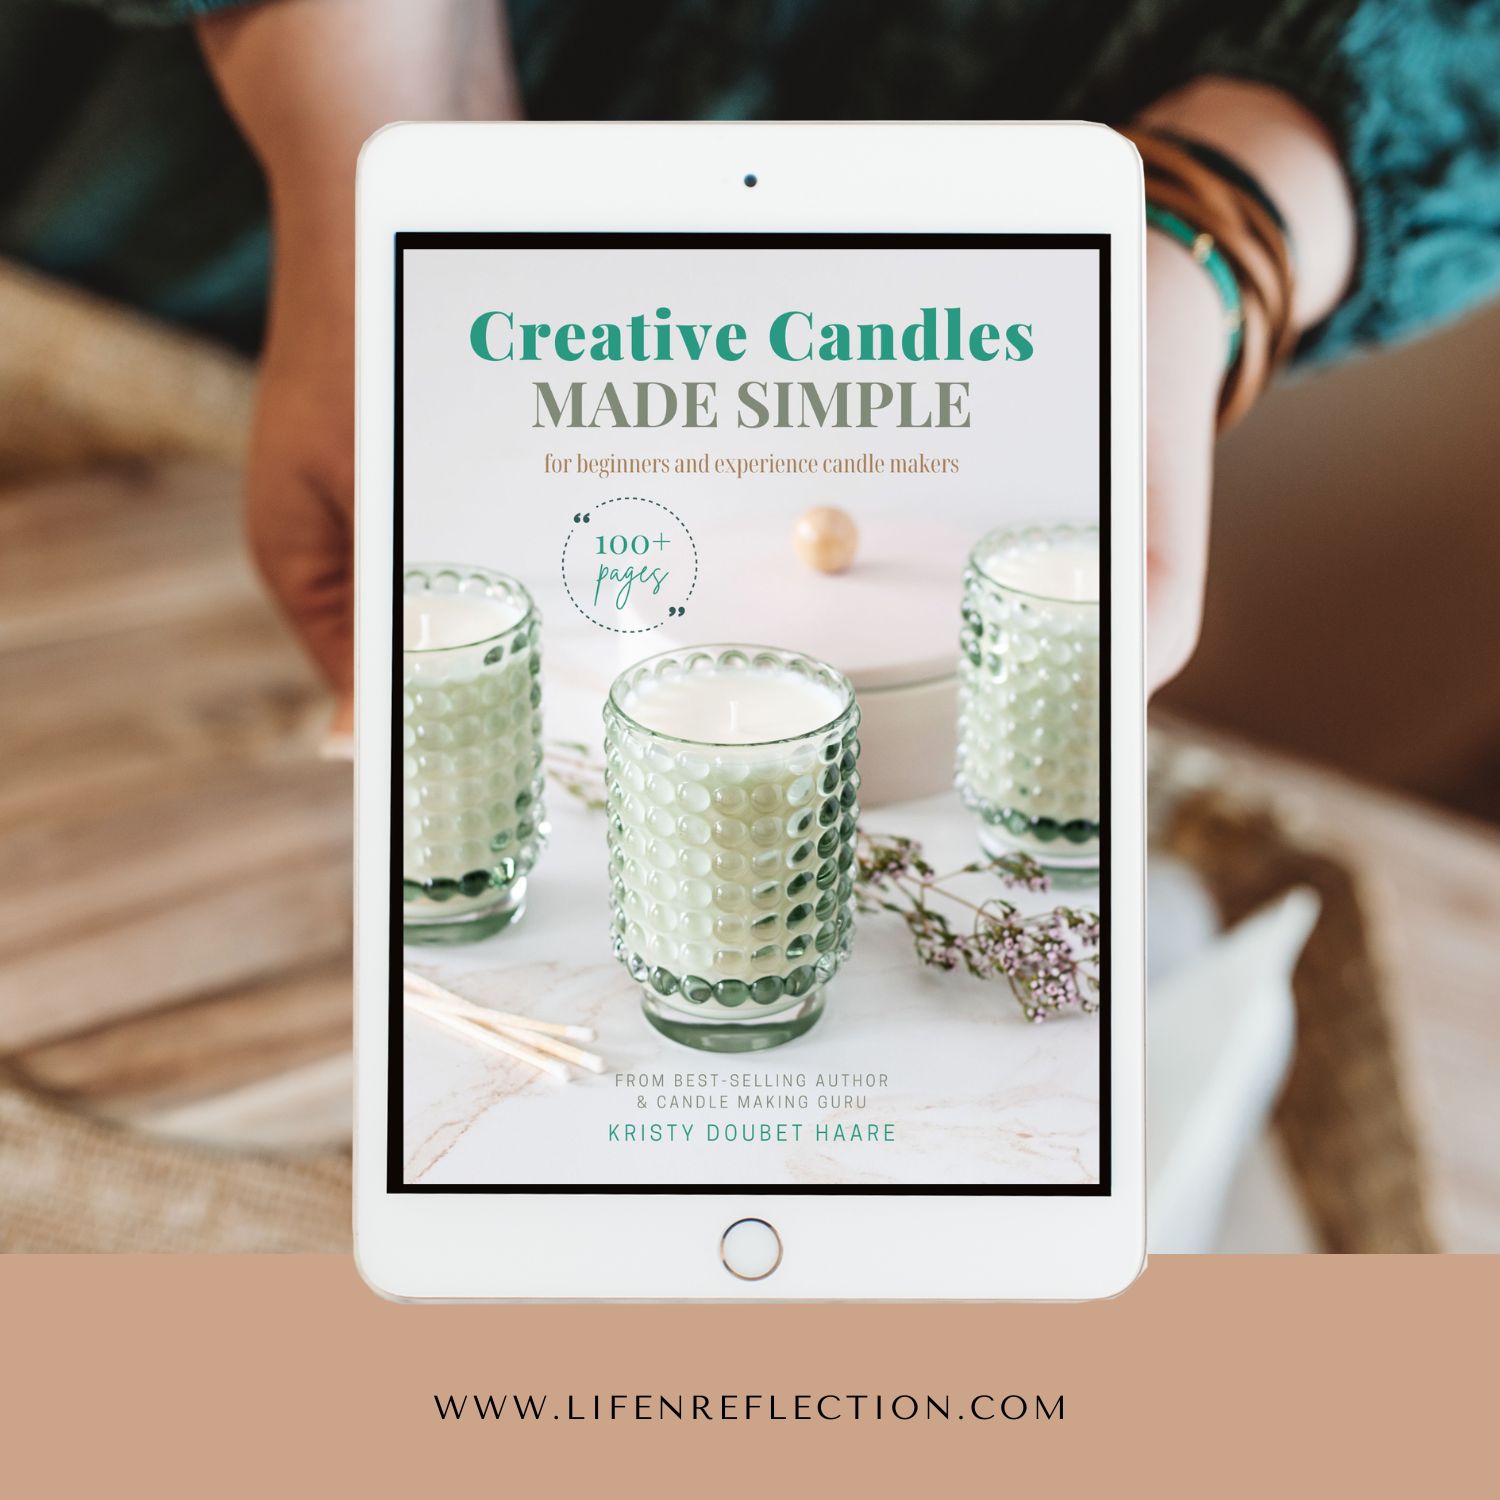 100+ pages to learn the art of candle making, refining and evolving your skills with each finished candle project, including essential guides and tips along the way.